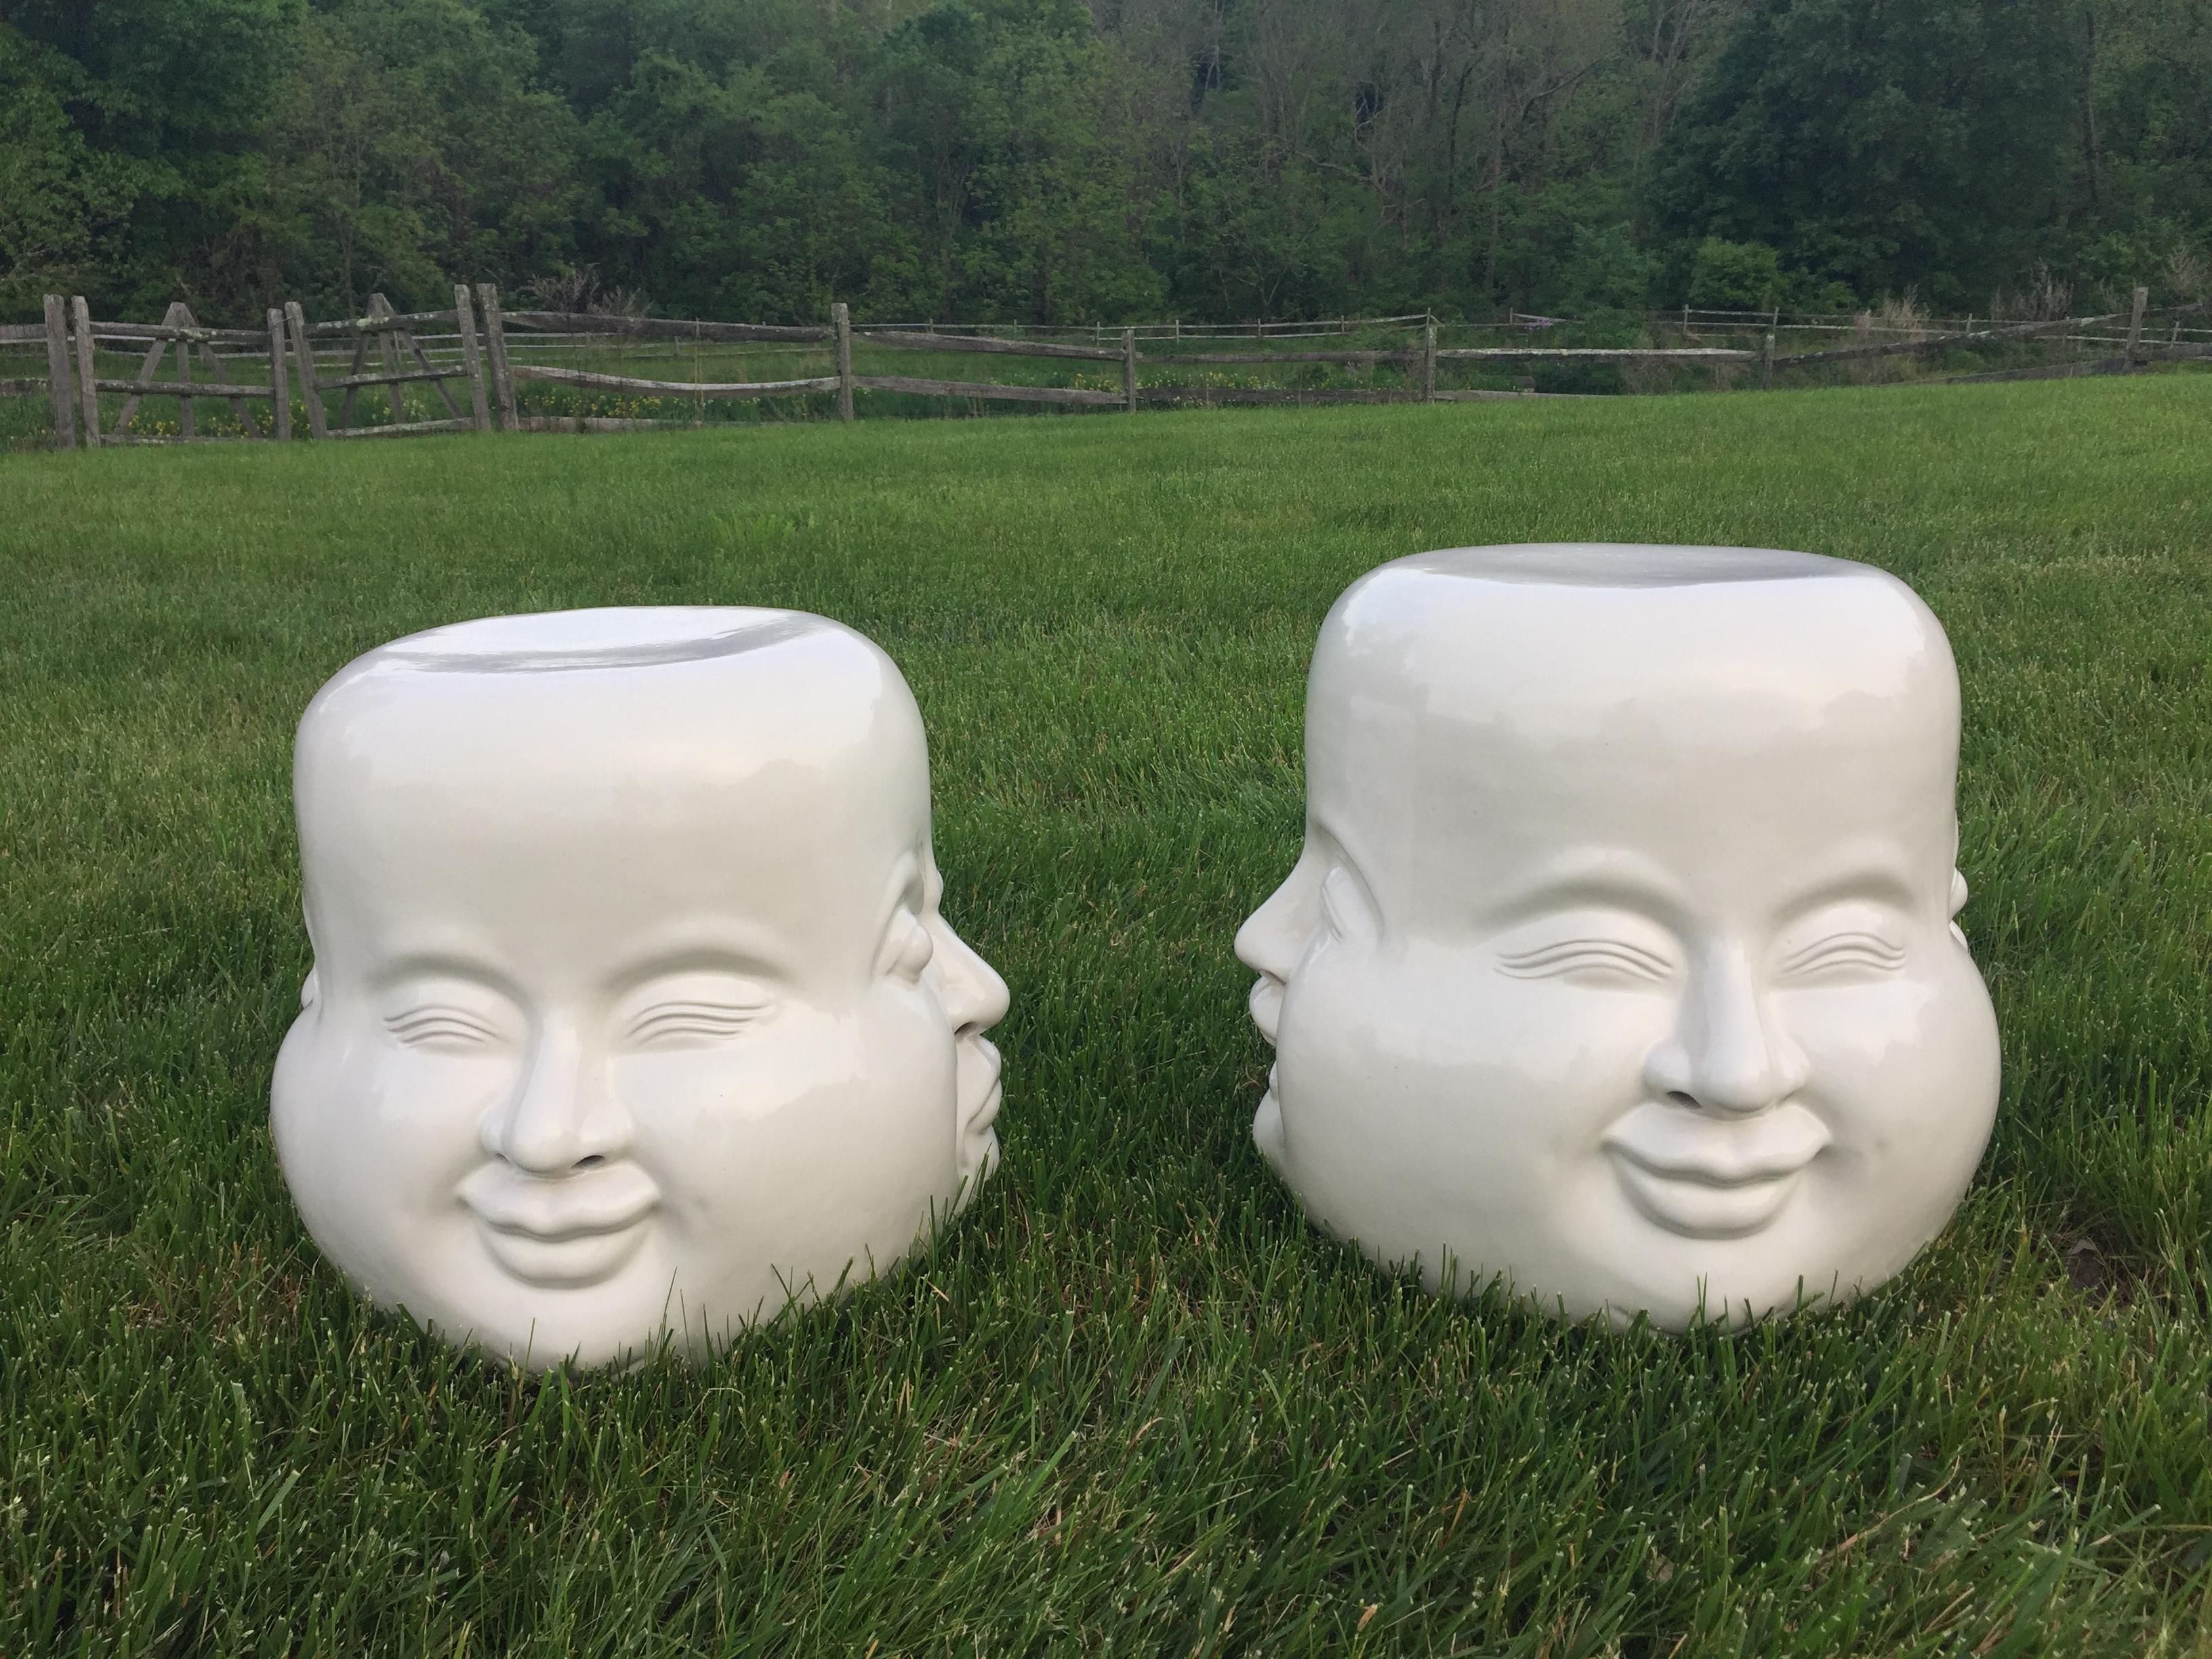 Indonesian Pair of Whimsical Blanc de Chine Garden Seat End Tables with Faces